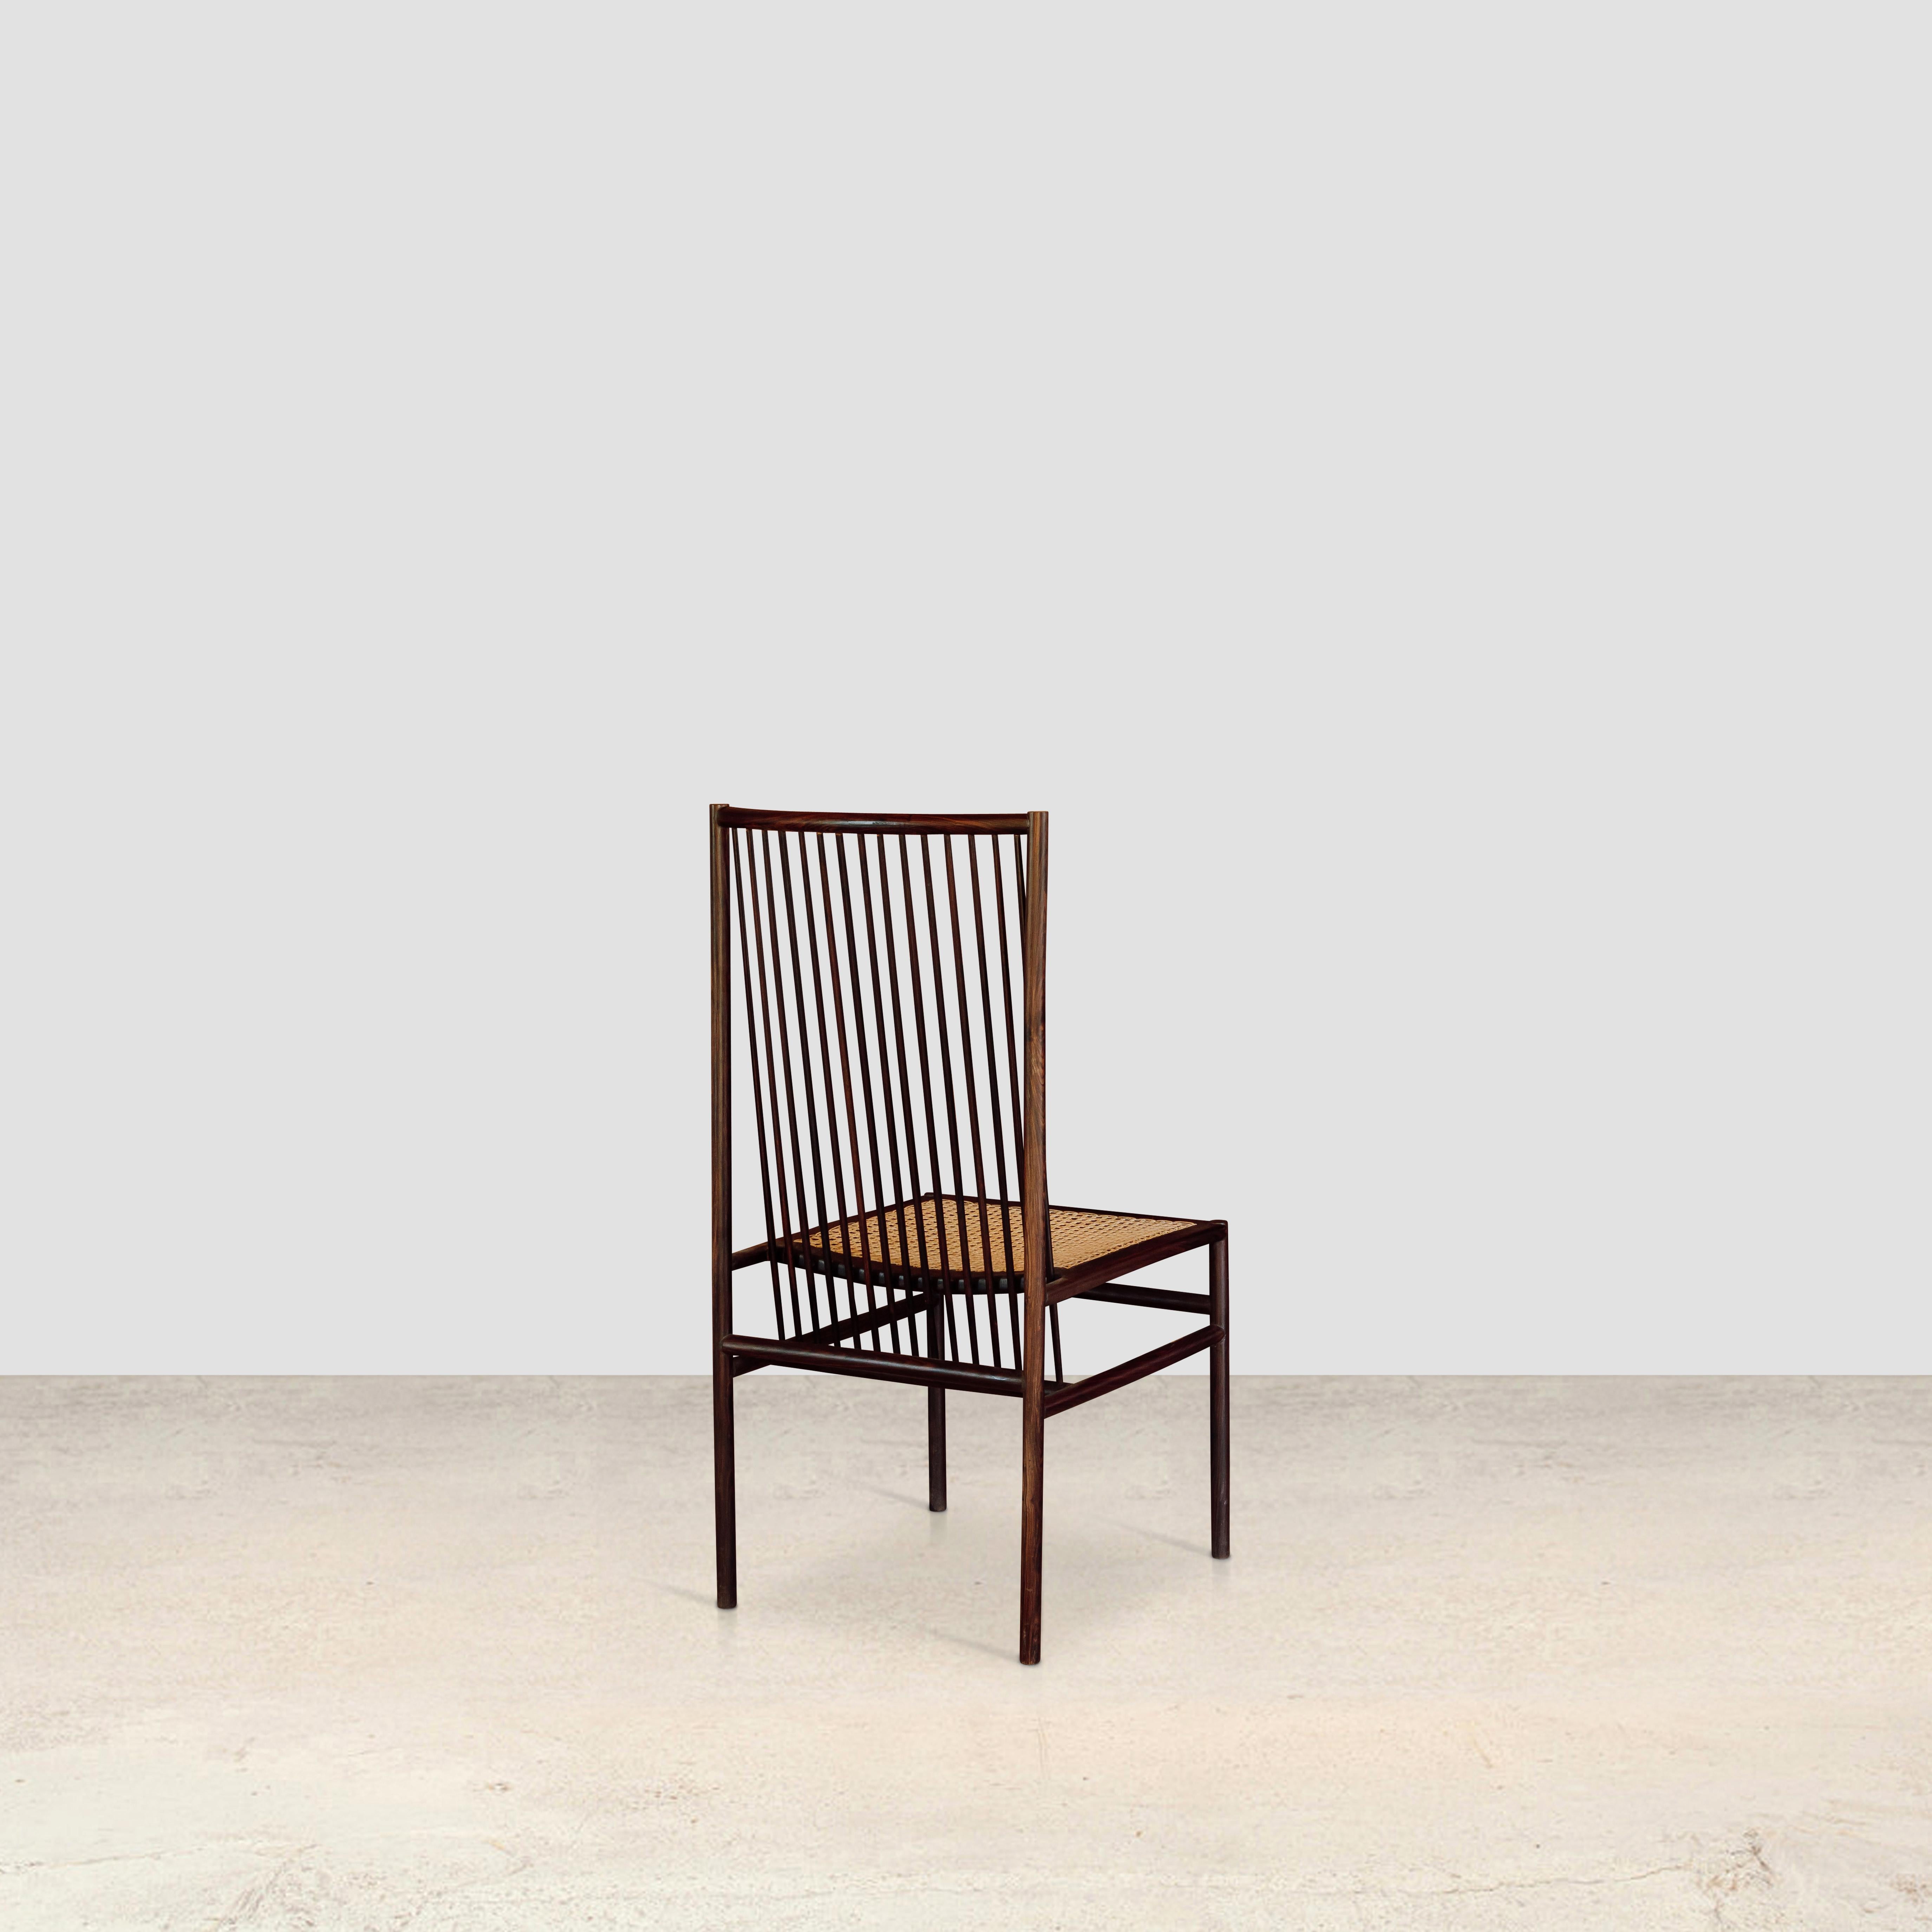 structural chair